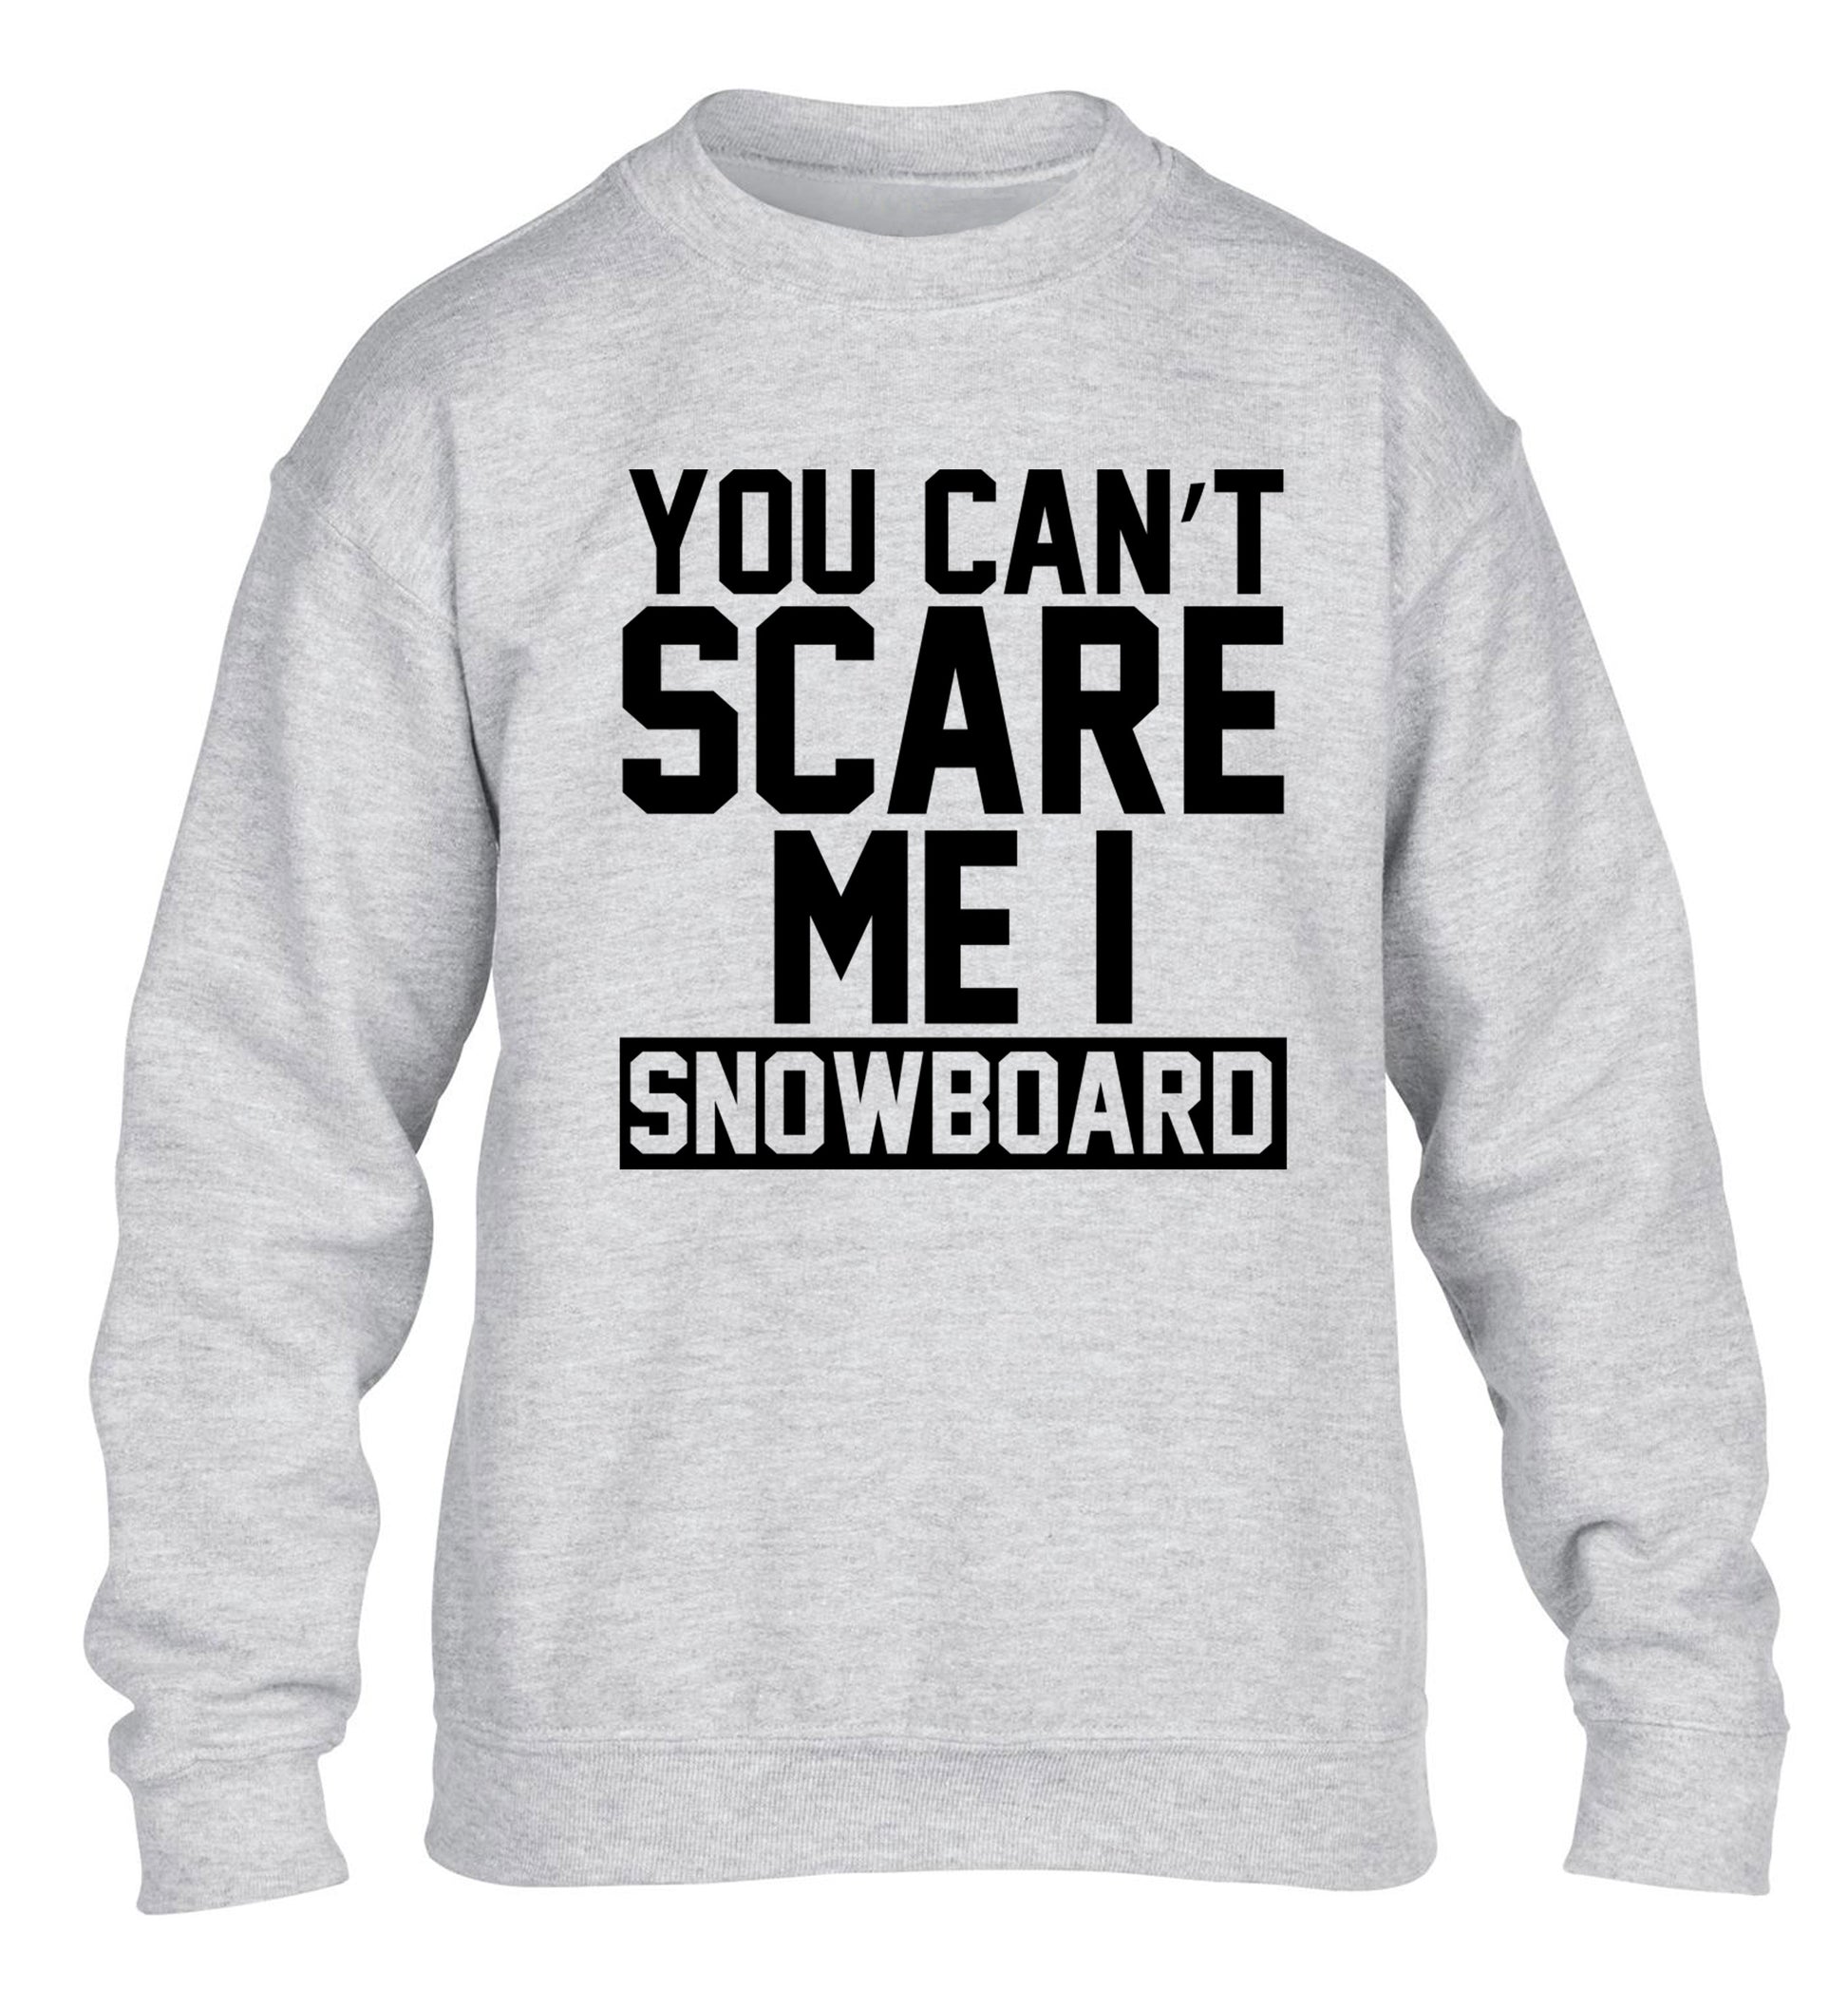 You can't scare me I snowboard children's grey sweater 12-14 Years